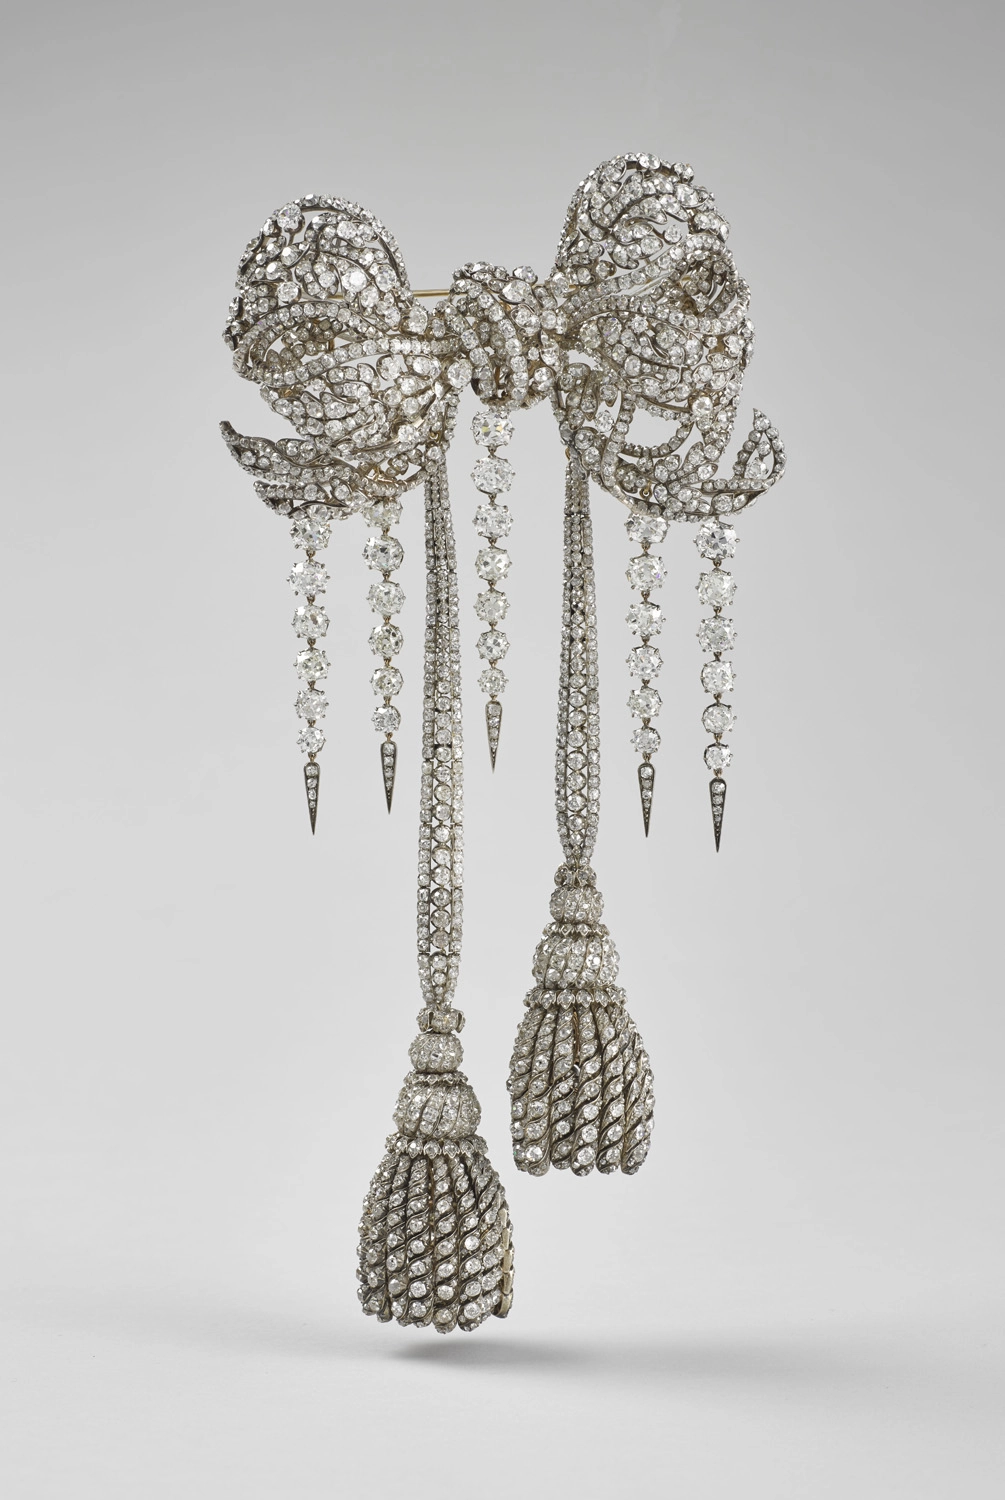 Sparkly Splendour: The Galerie d'Apollon and the French Crown Jewels at the  Louvre